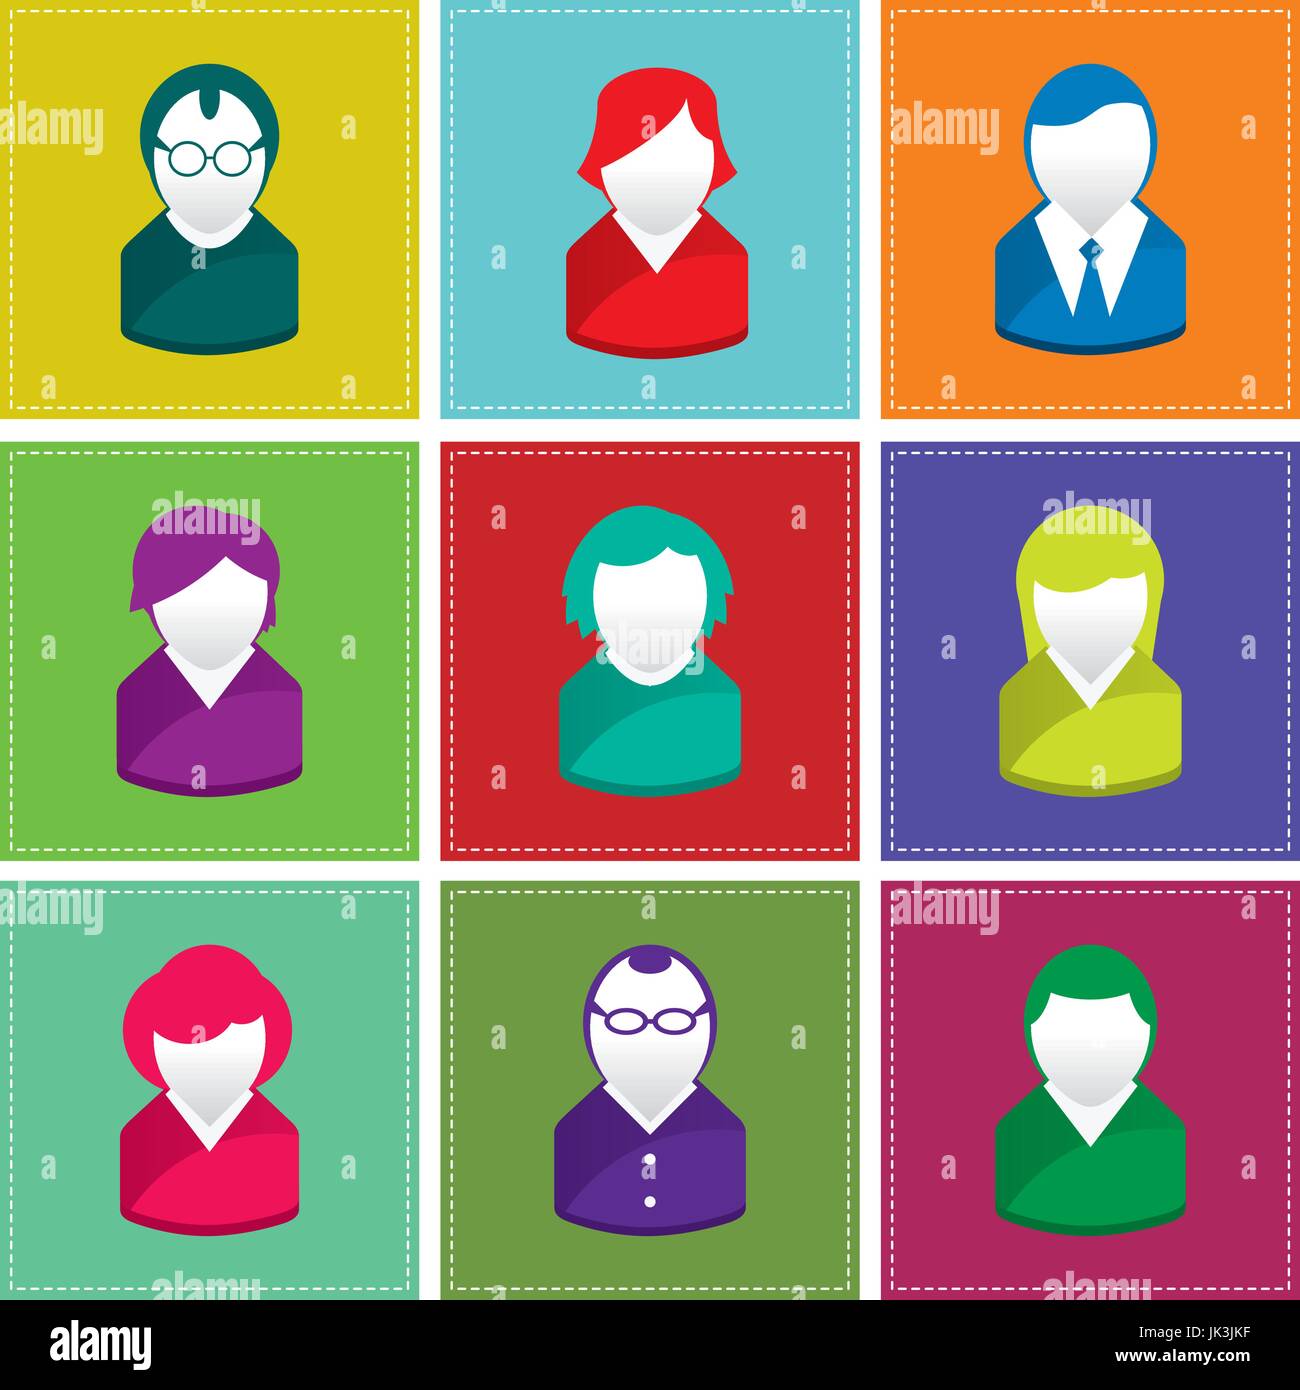 Set of business people icons Stock Vector